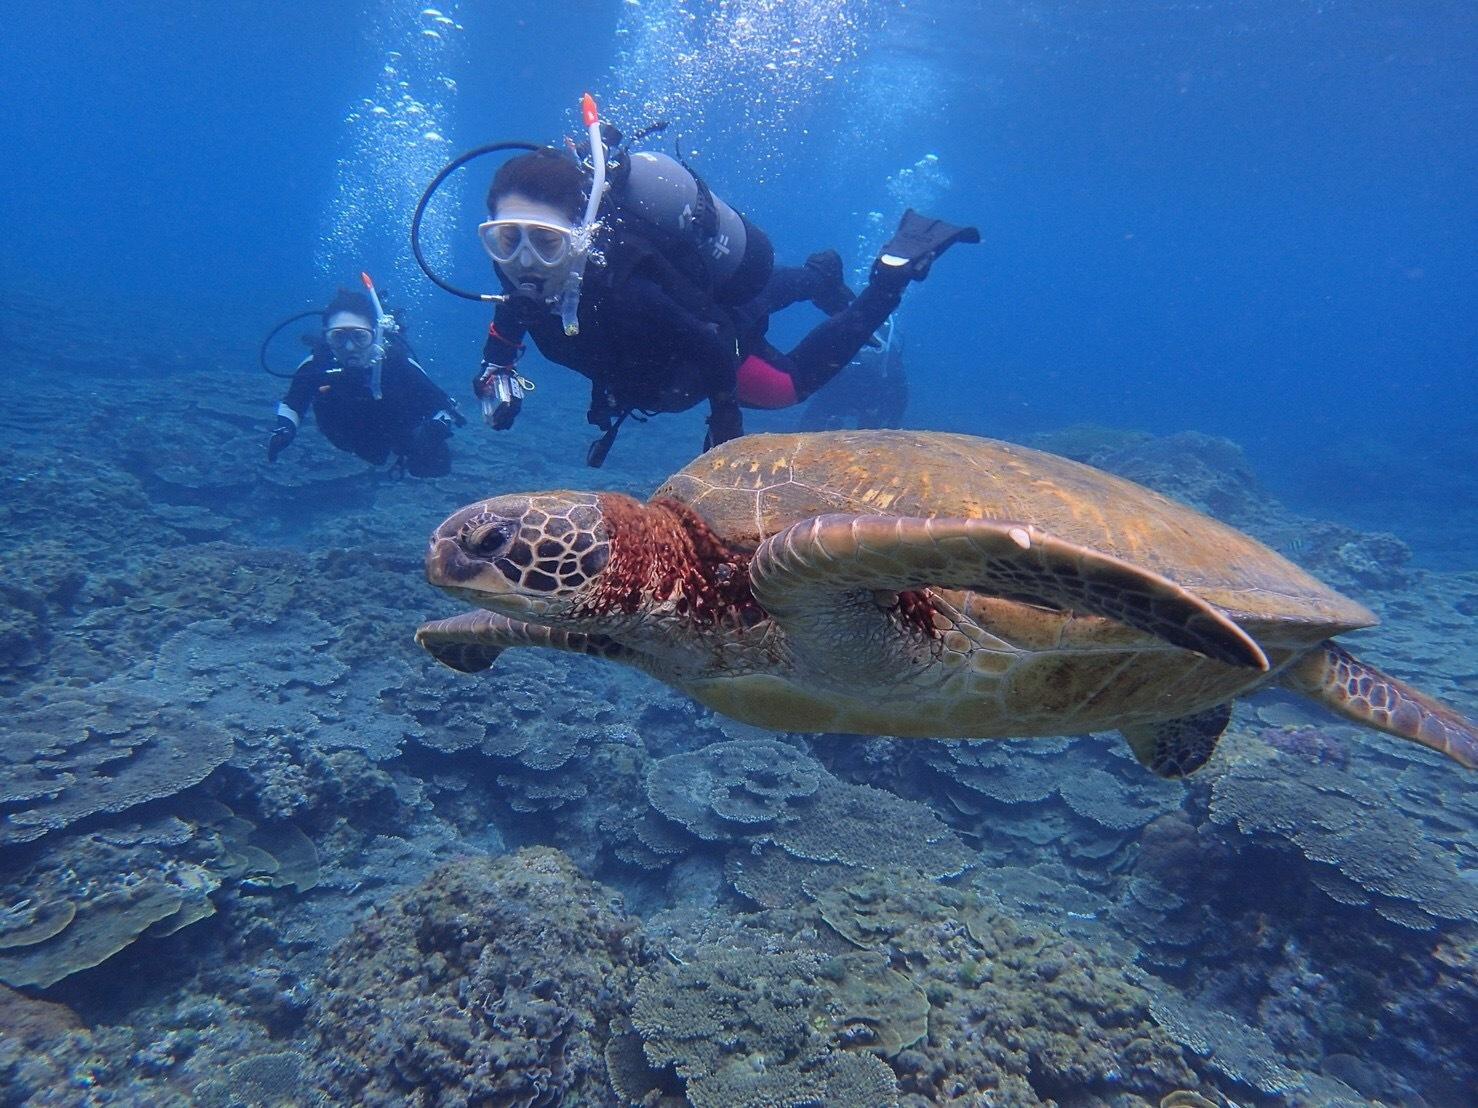 SMALL ISLAND DISCOVERY - Diving with Turtles on Hachijojima Island